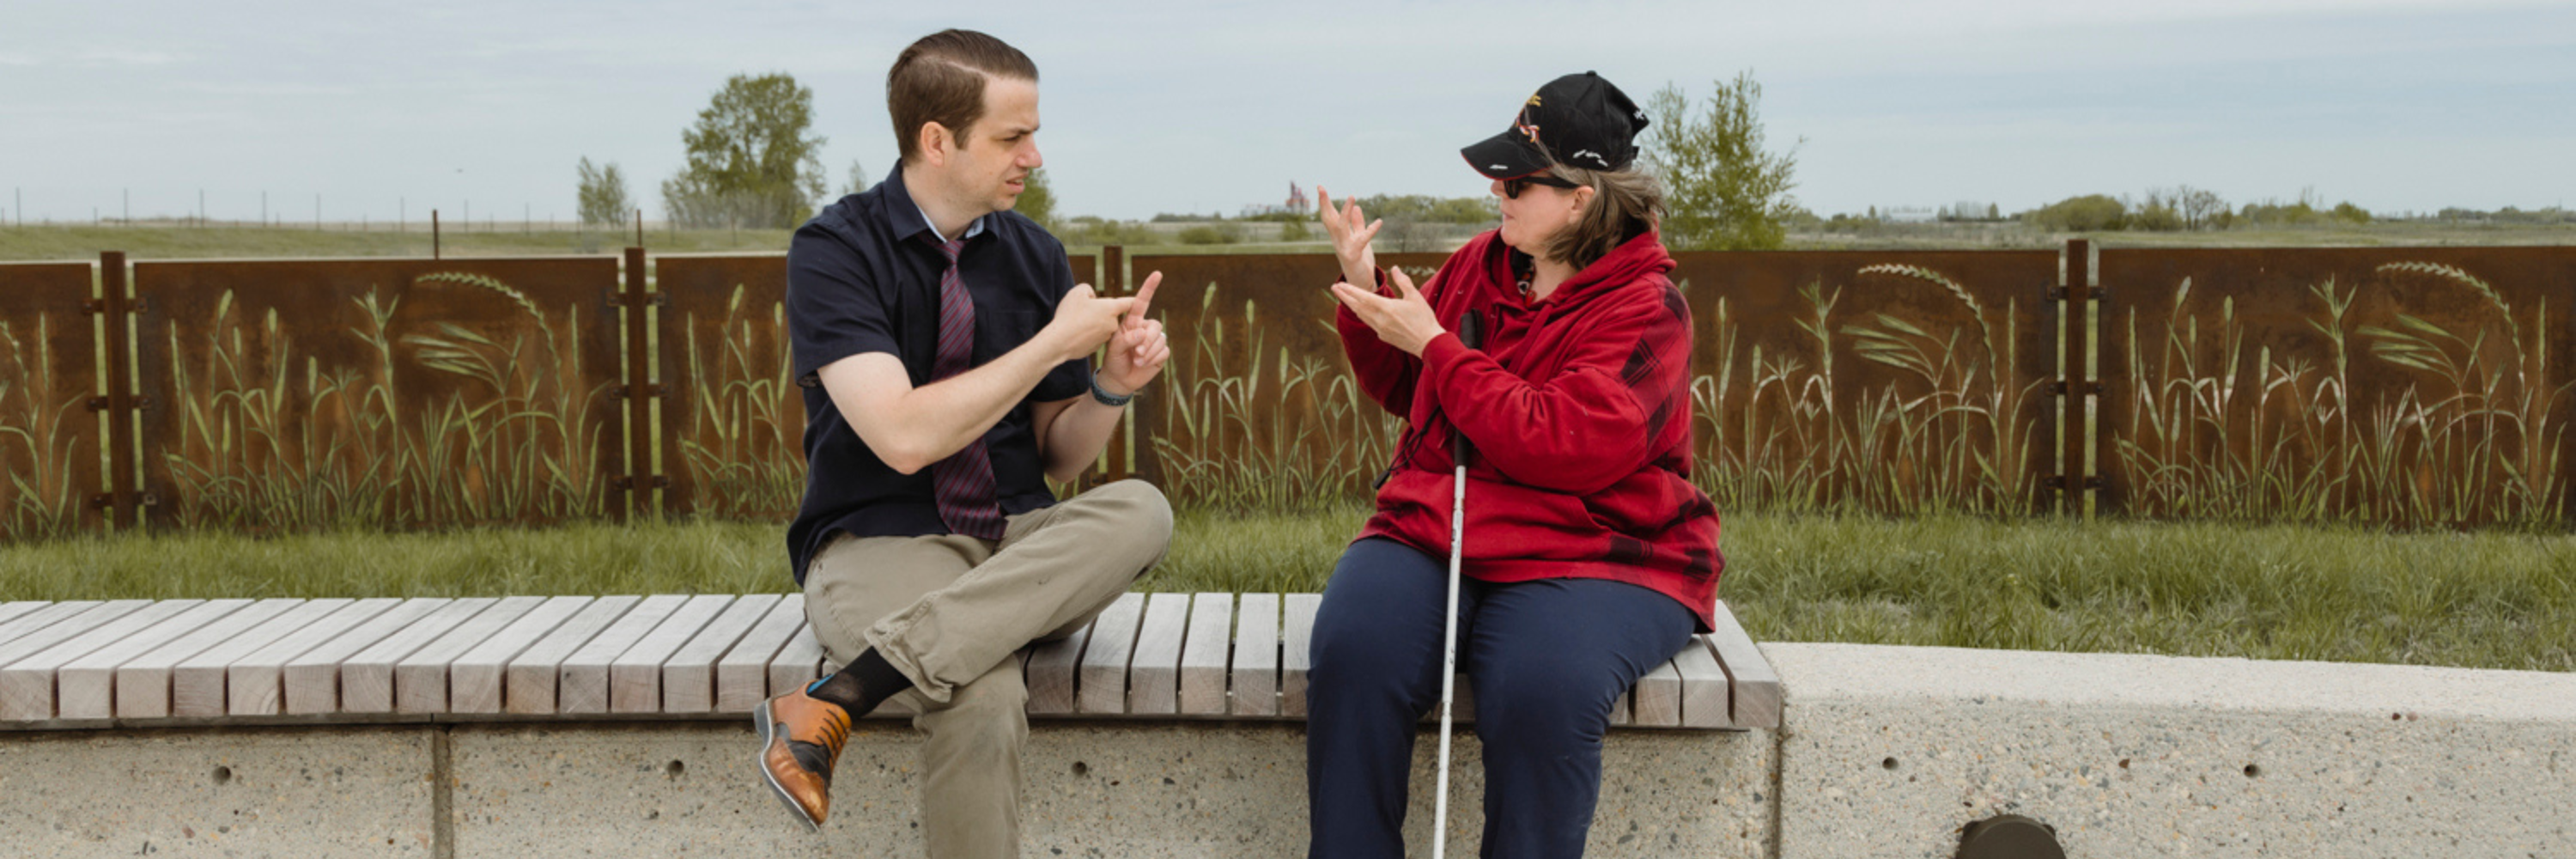 A man and woman have a conversation outside using ASL.